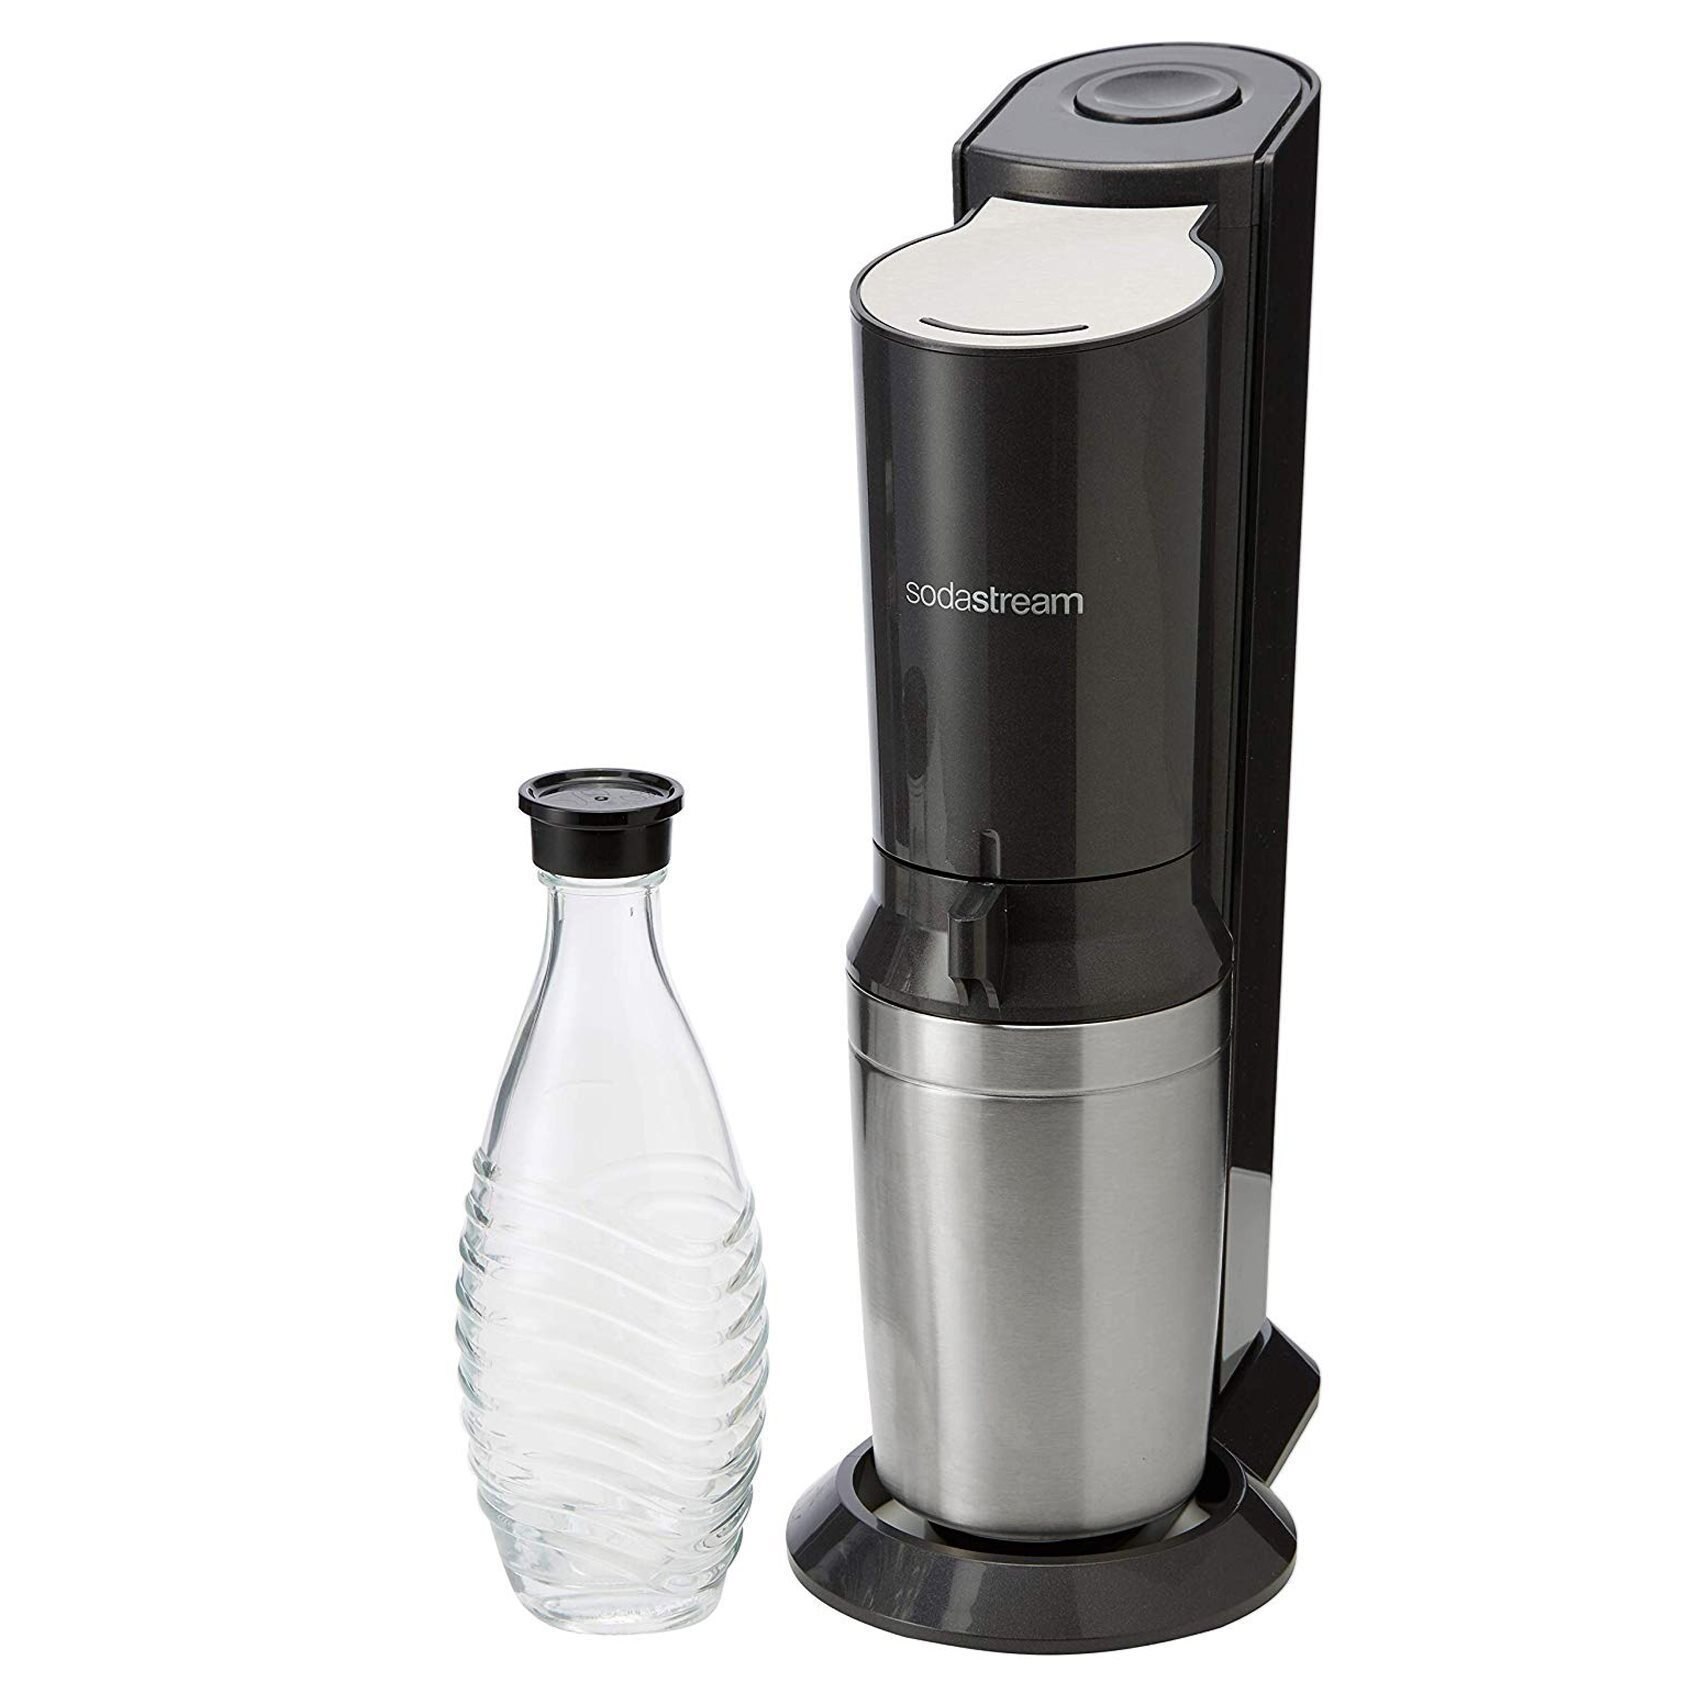 she is Carry clear Aparat sifon Crystal, Black - SodaStream - eMAG.ro